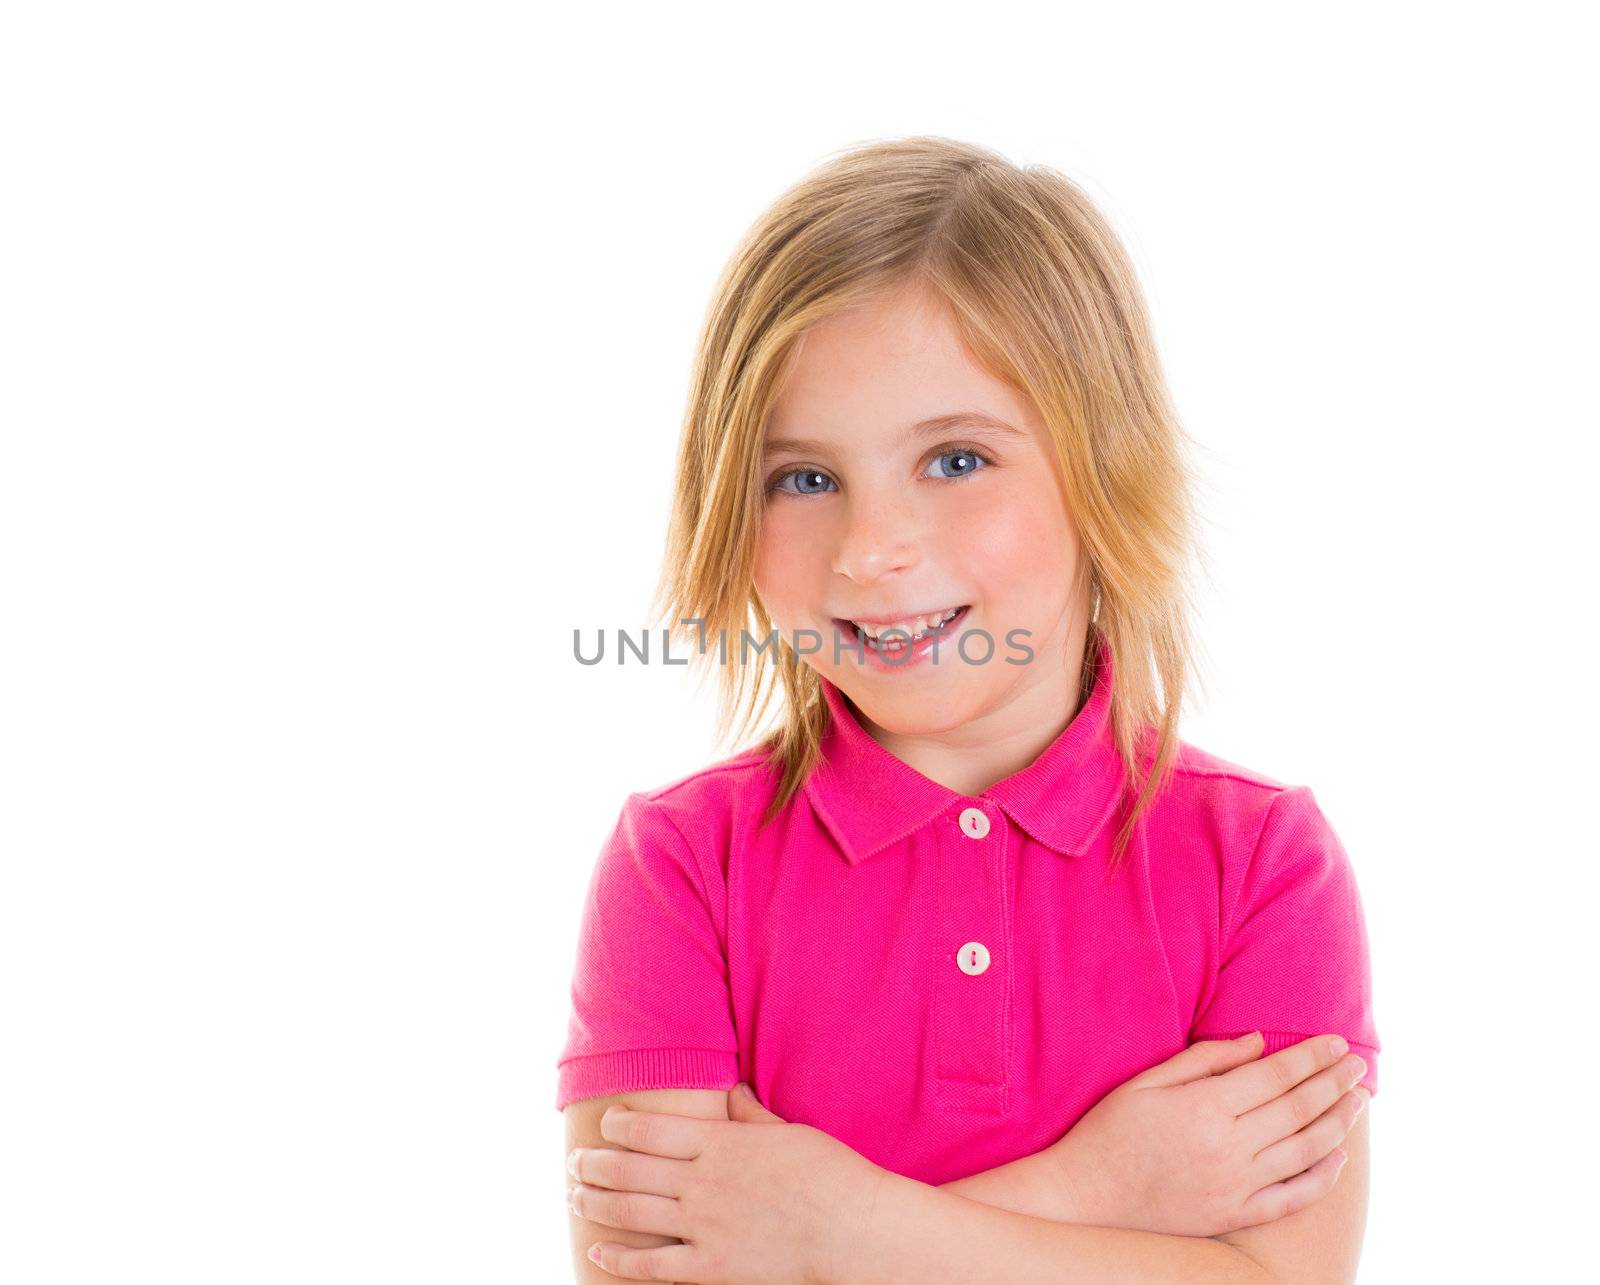 Blond child girl with pink t-shirt smiling portrait by lunamarina